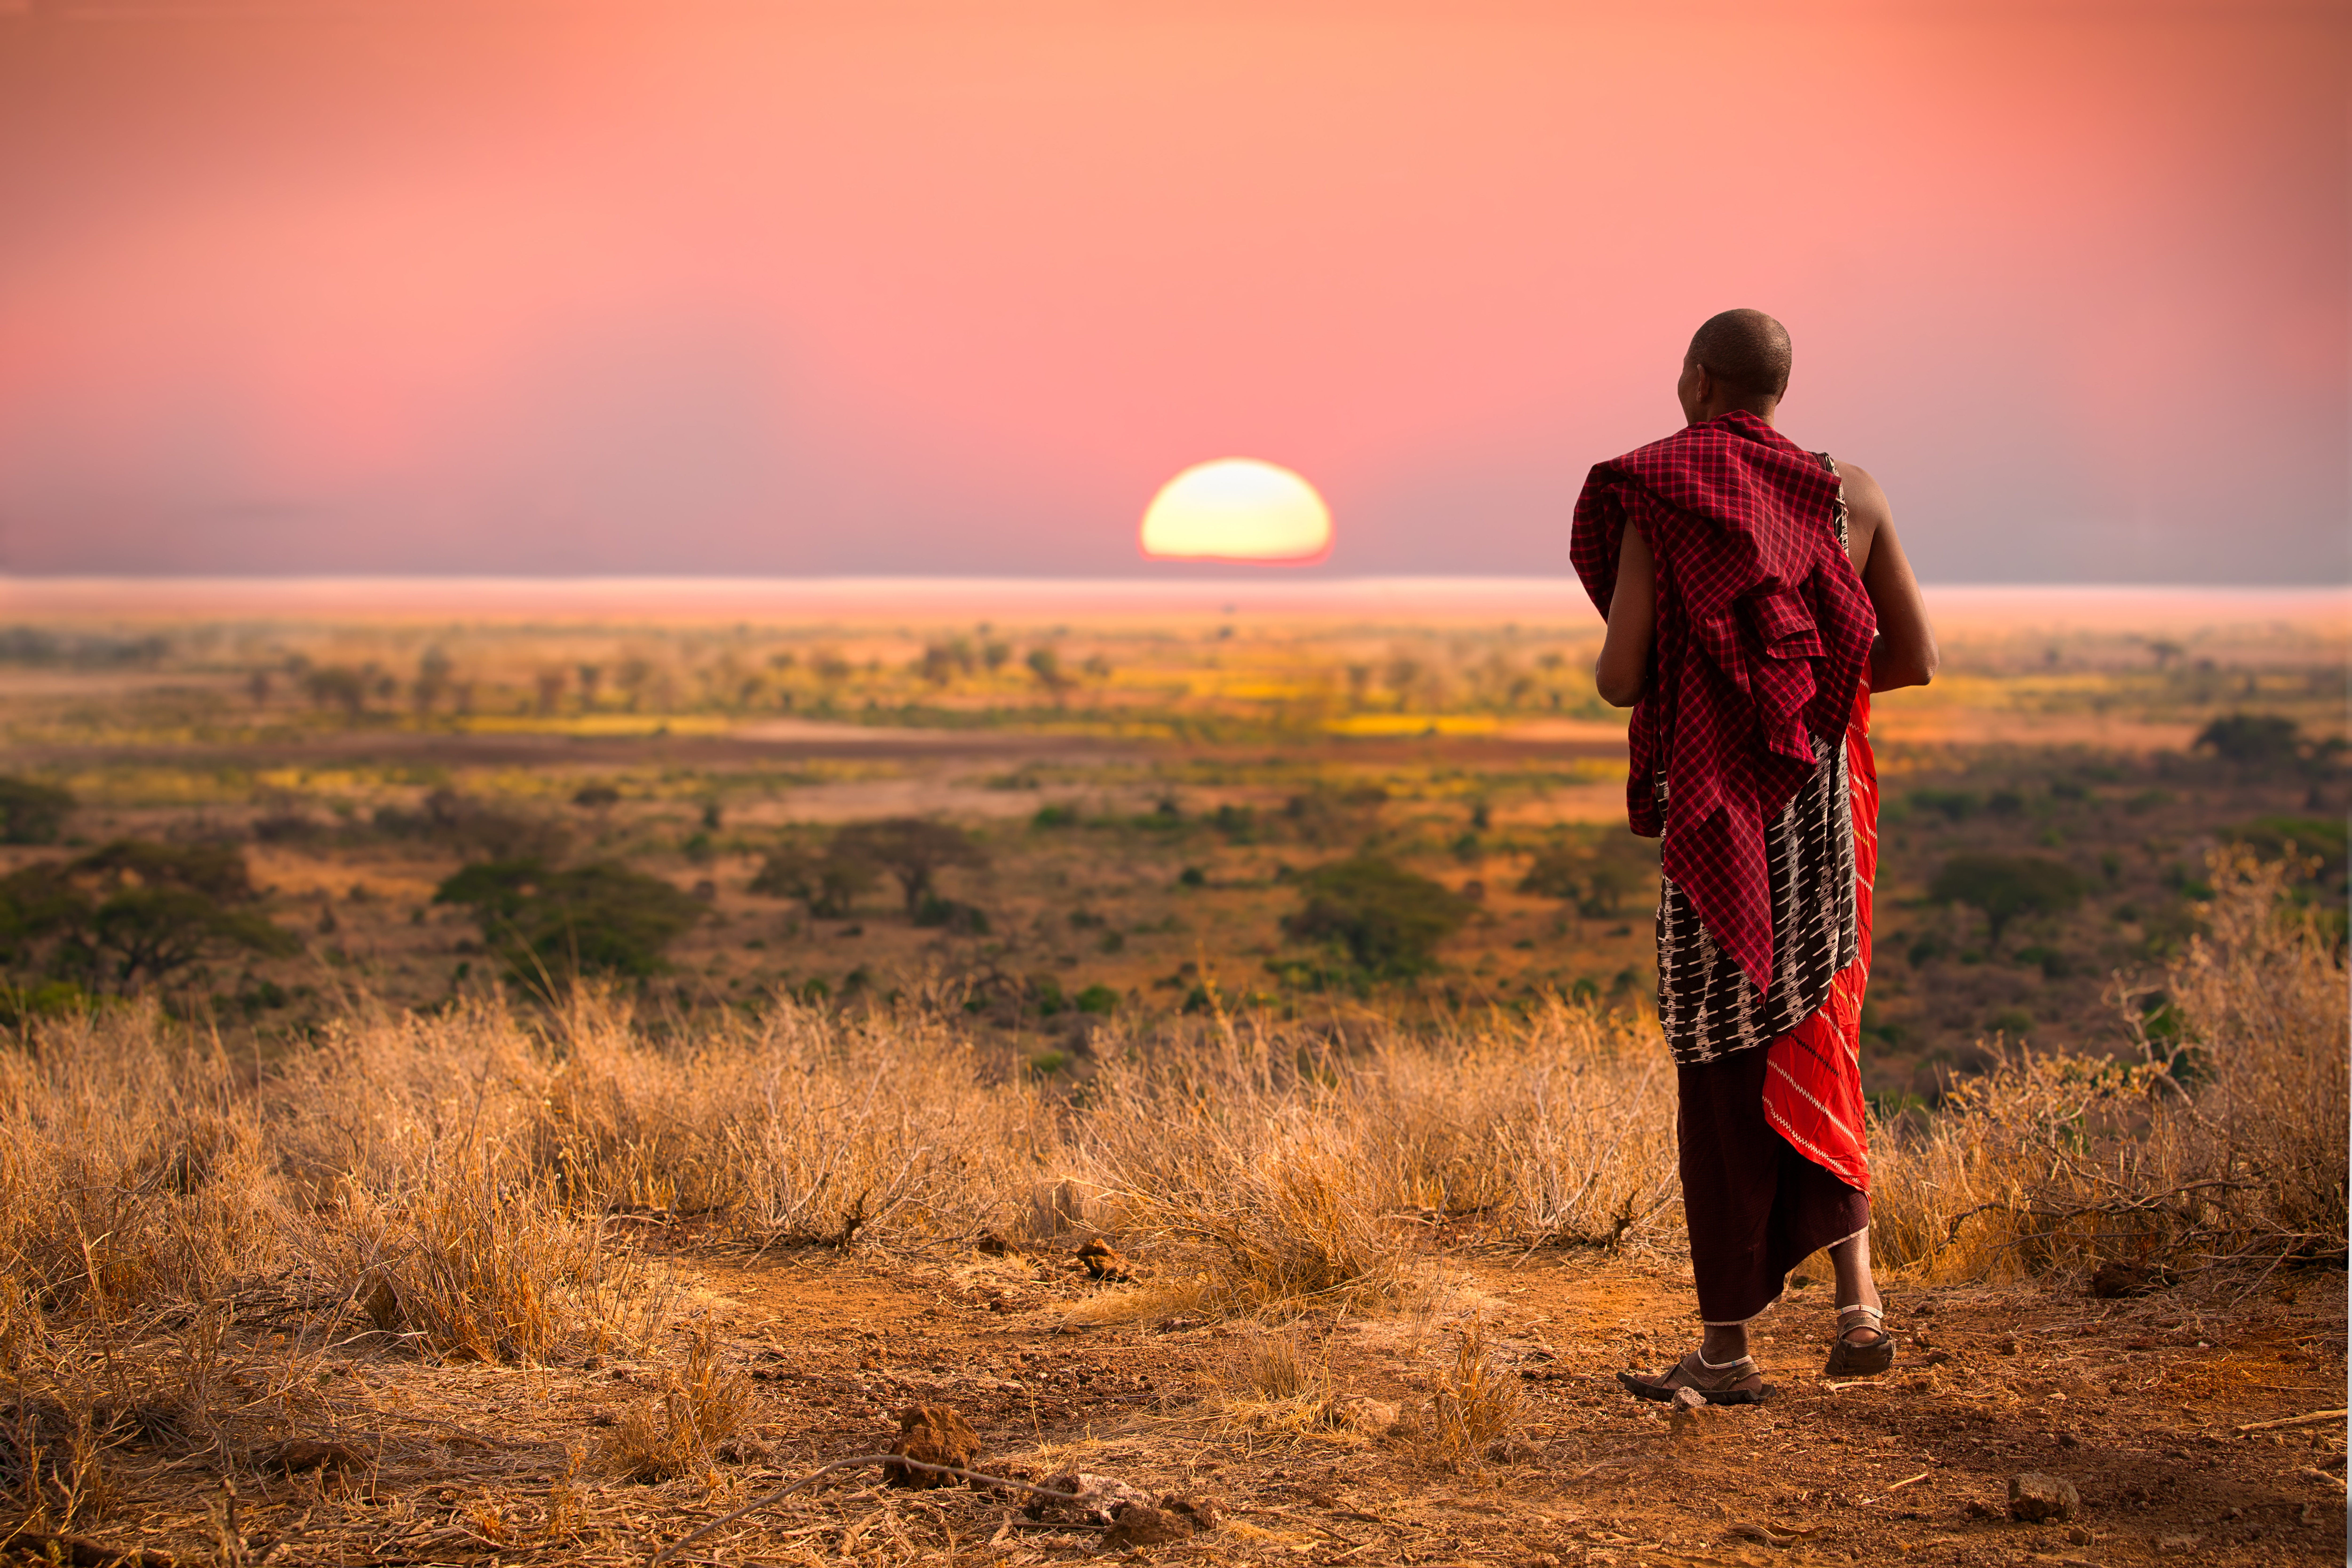 Meet the culture - Eyes on Africa Safaris